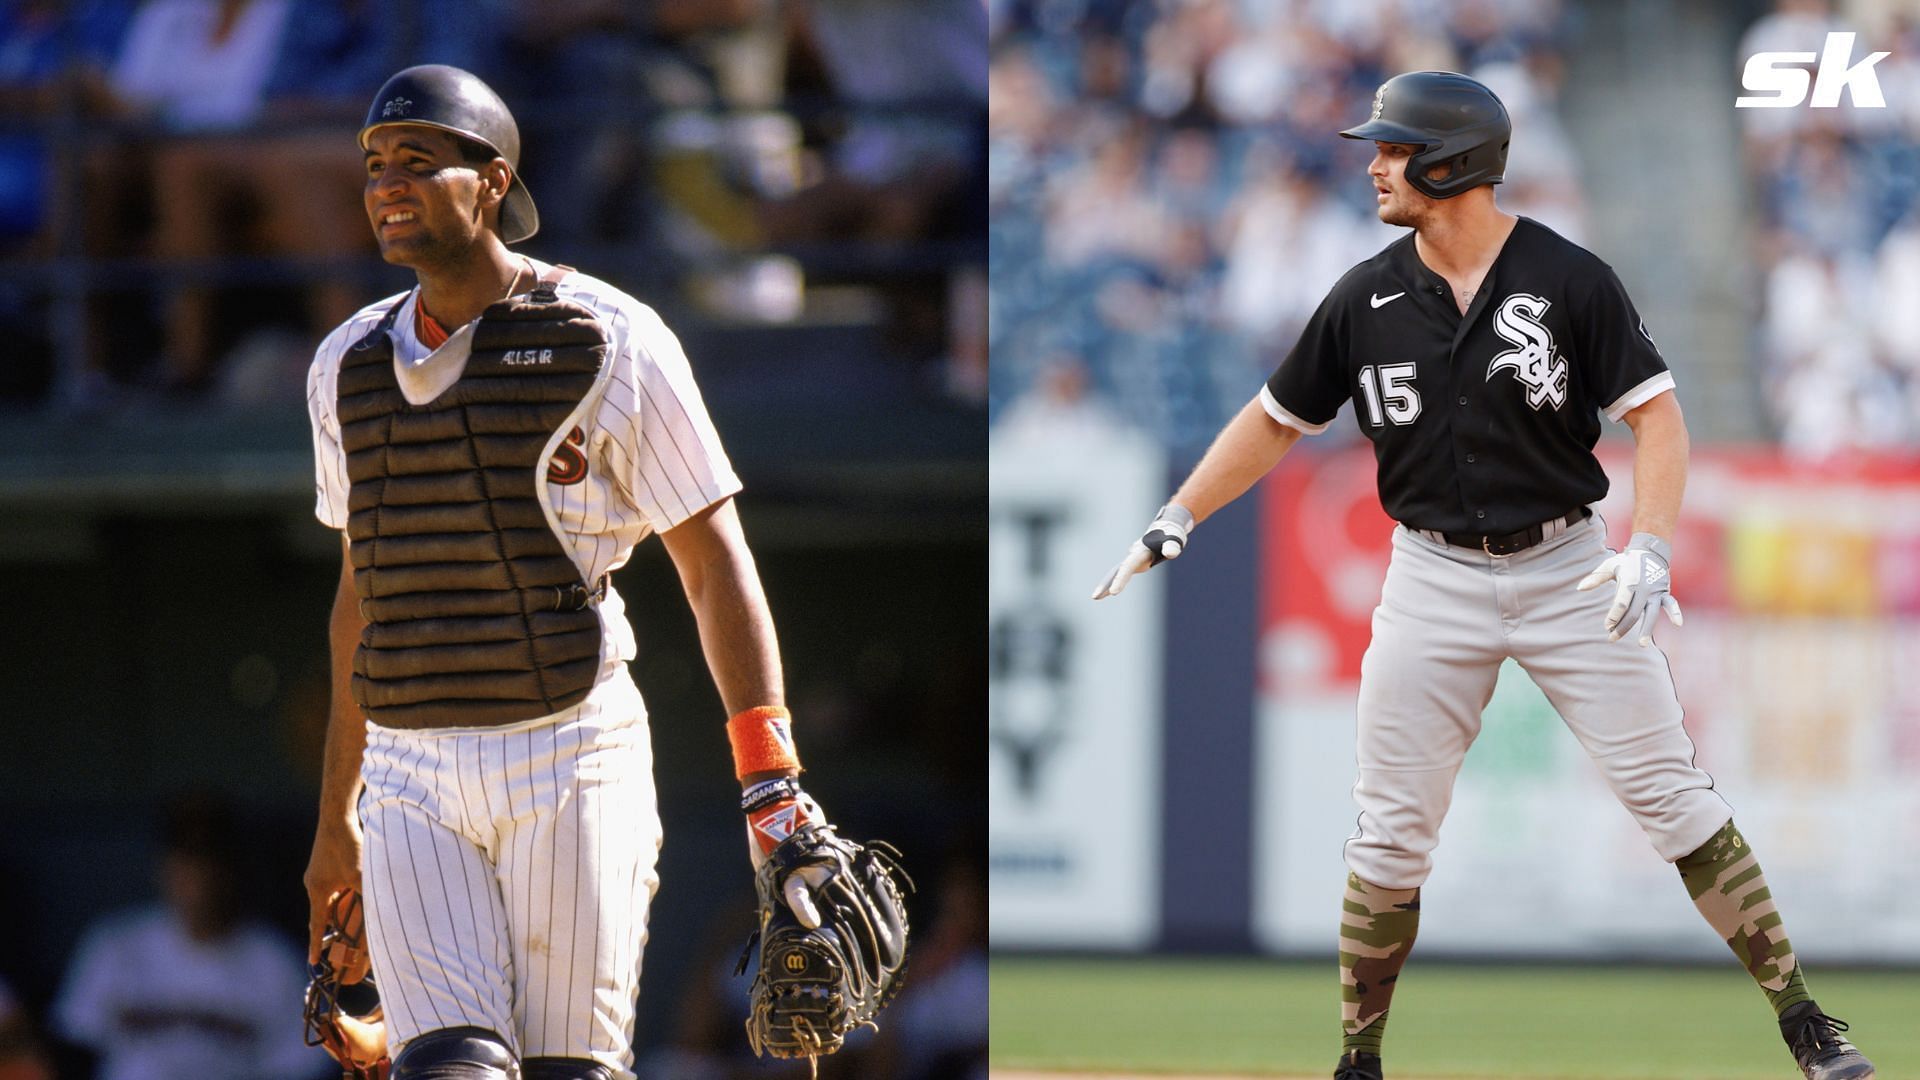 The 6 Chicago White Sox players who have won Rookie of the Year